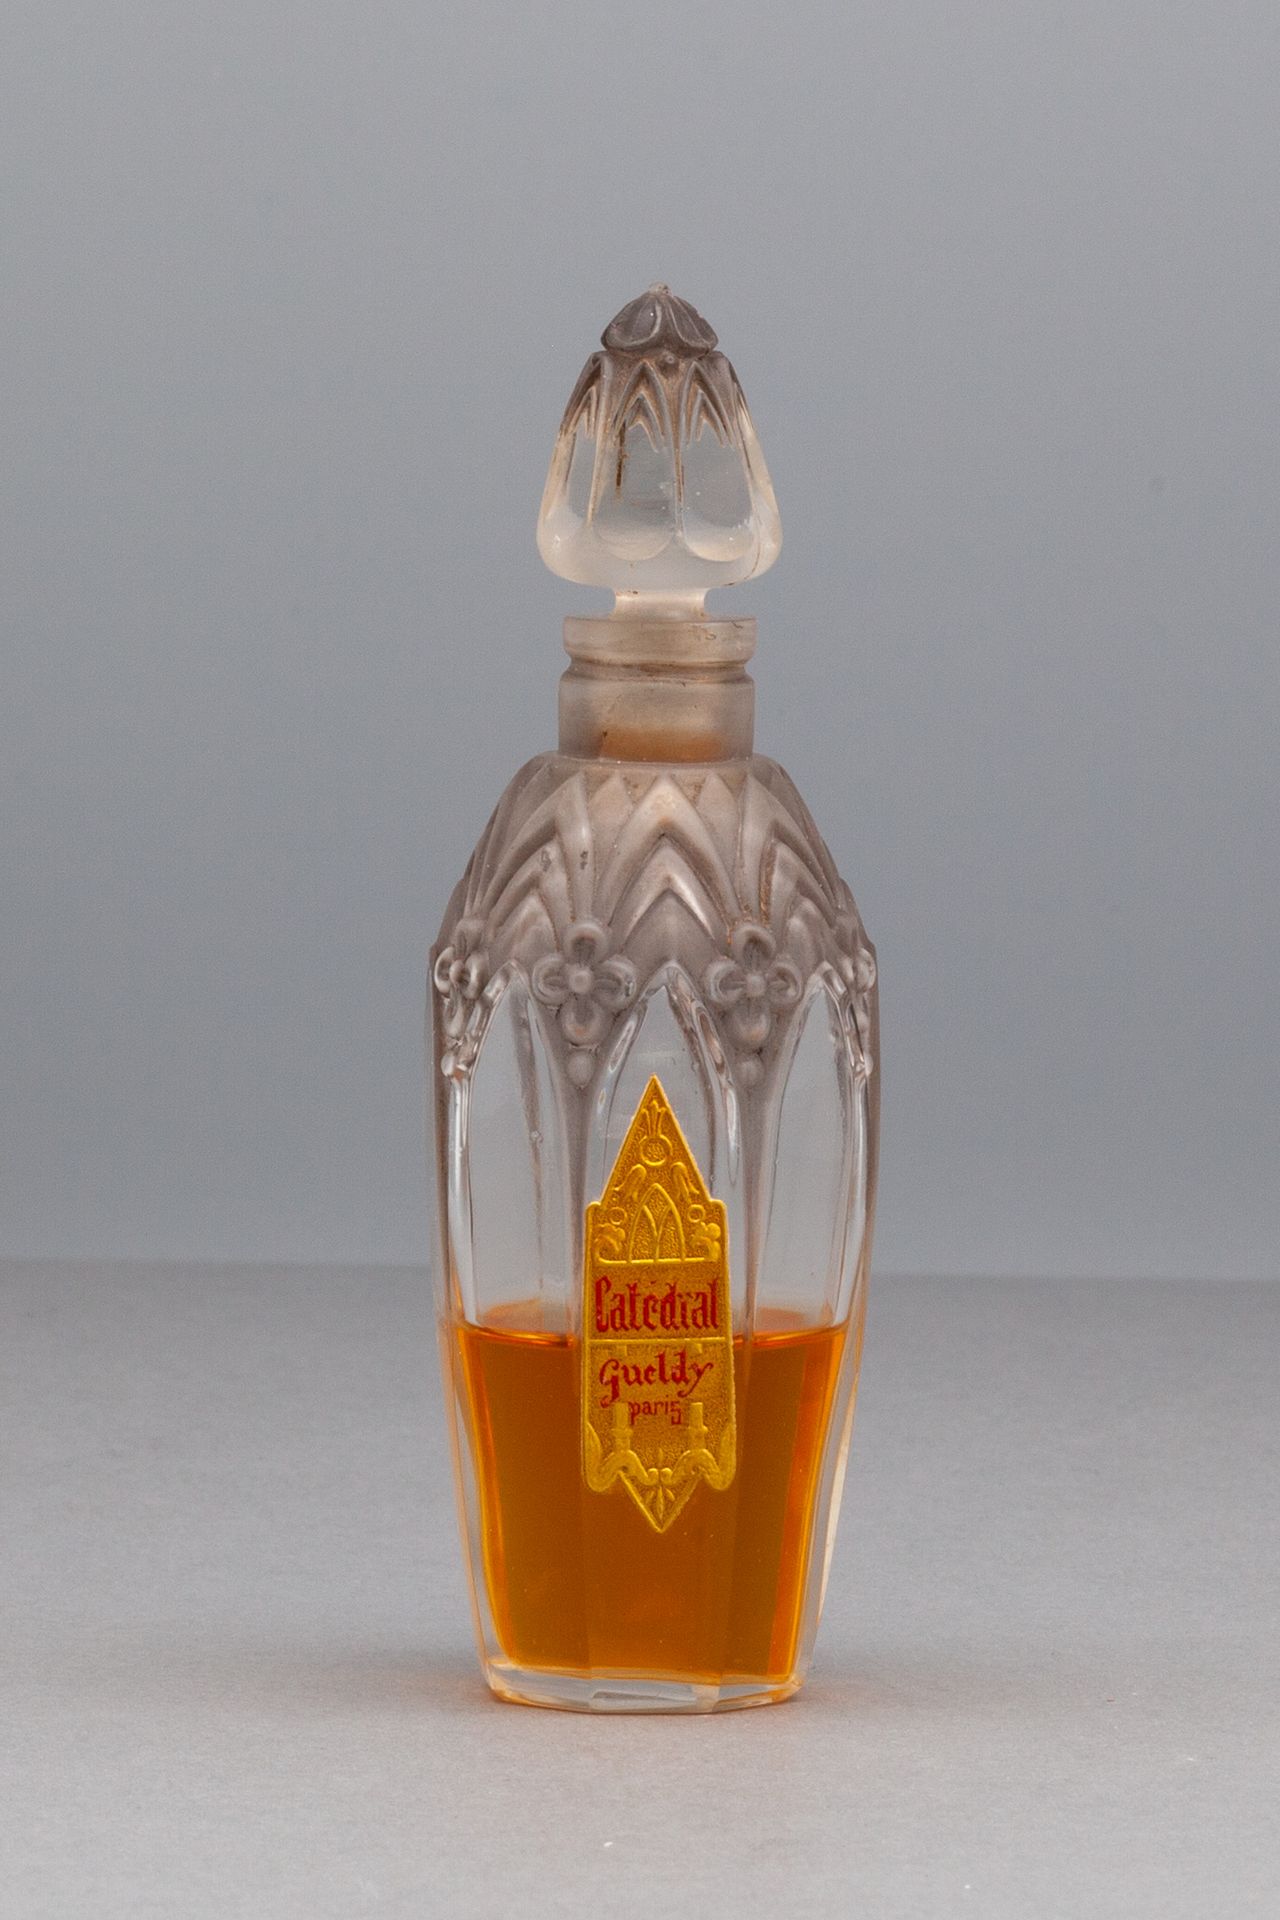 GUELDY "CATEDRAL" Glass bottle of form olive with decoration of flowers. Gilded &hellip;